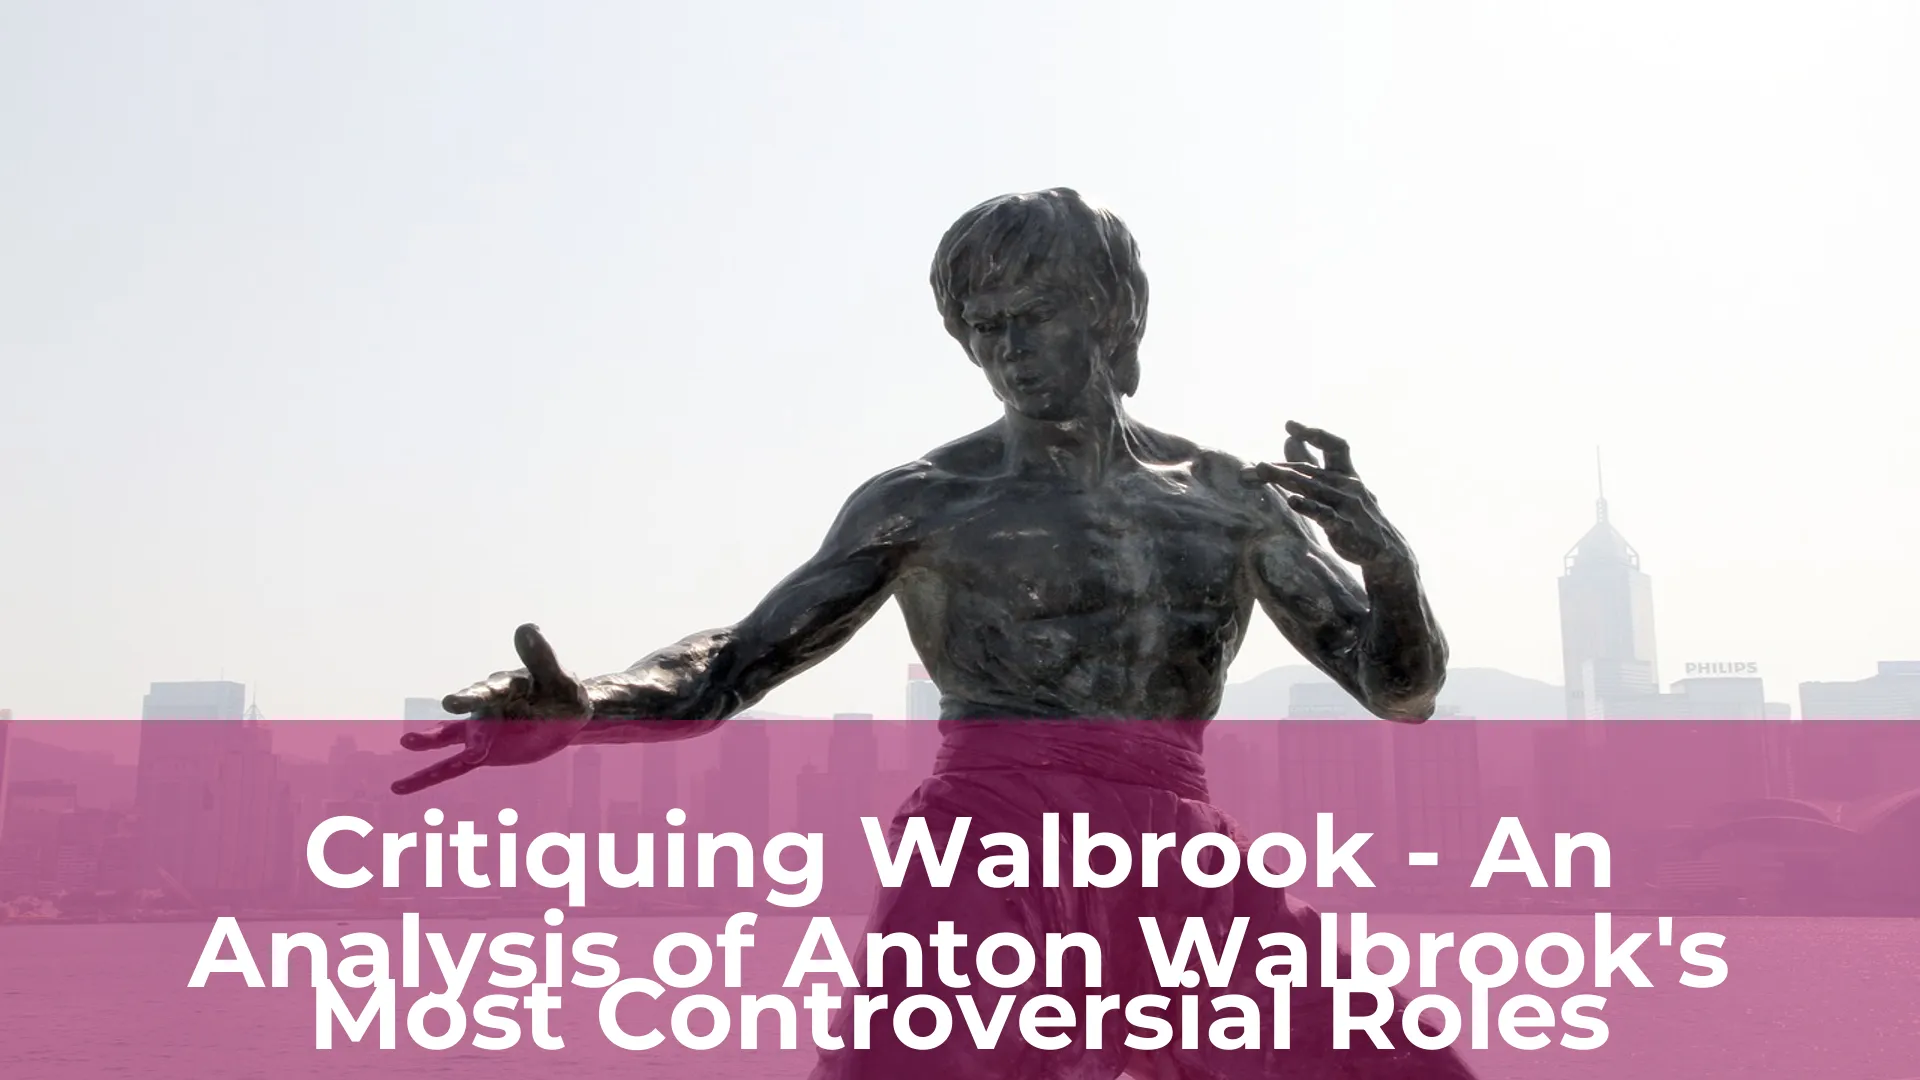 Critiquing walbrook an analysis of anton walbrooks most controversial roles